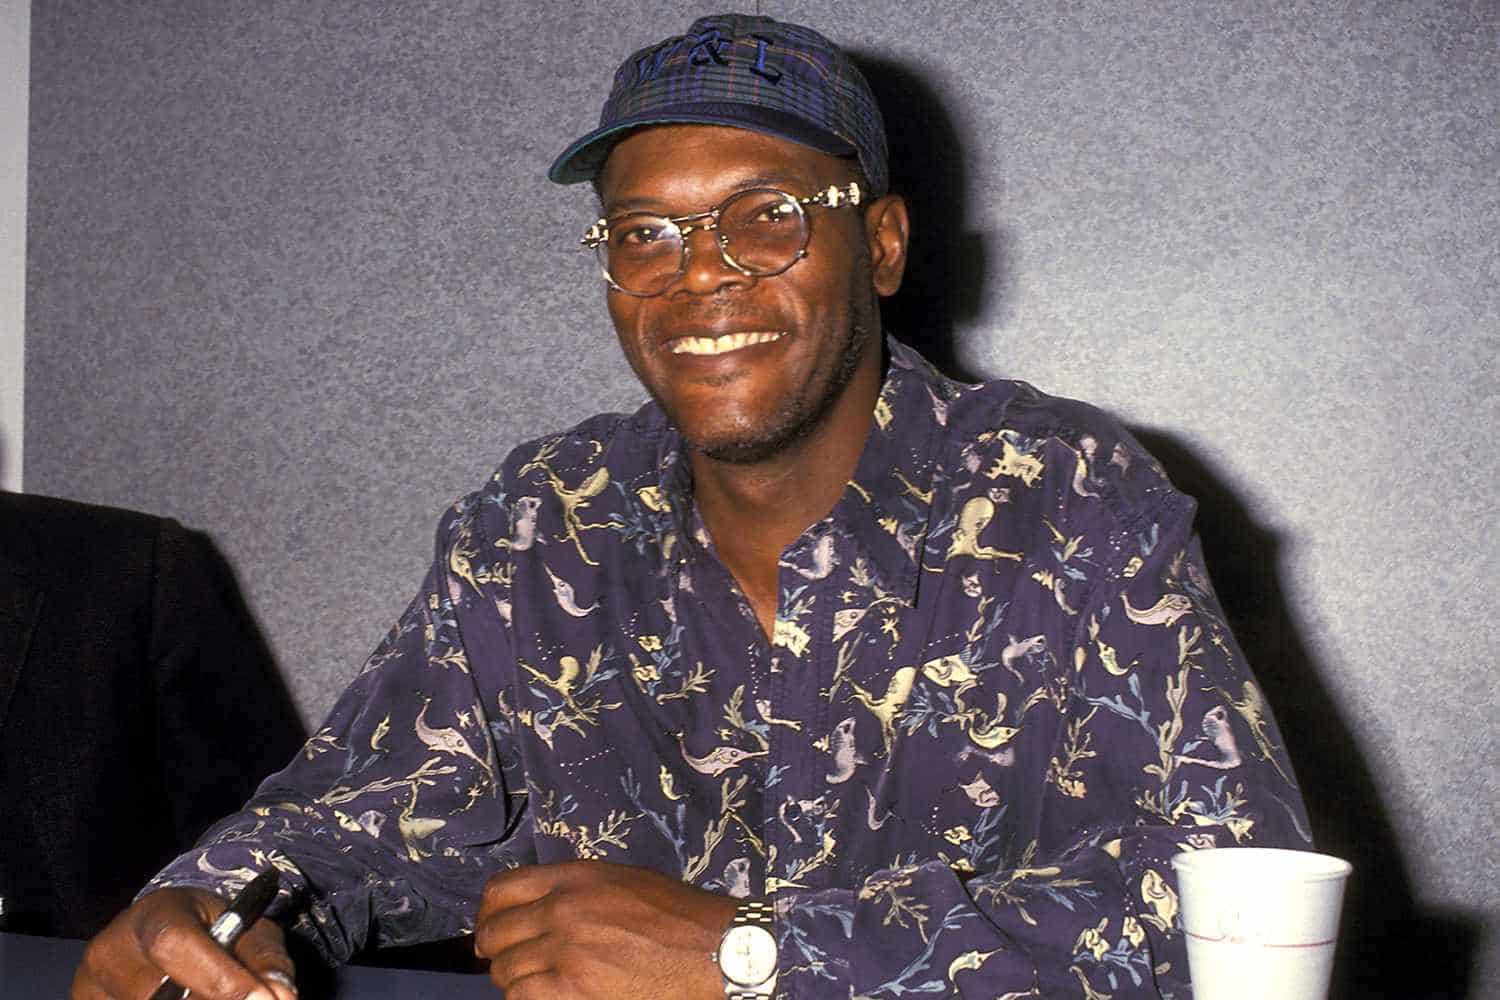 All about Samuel L. Jackson's controversies